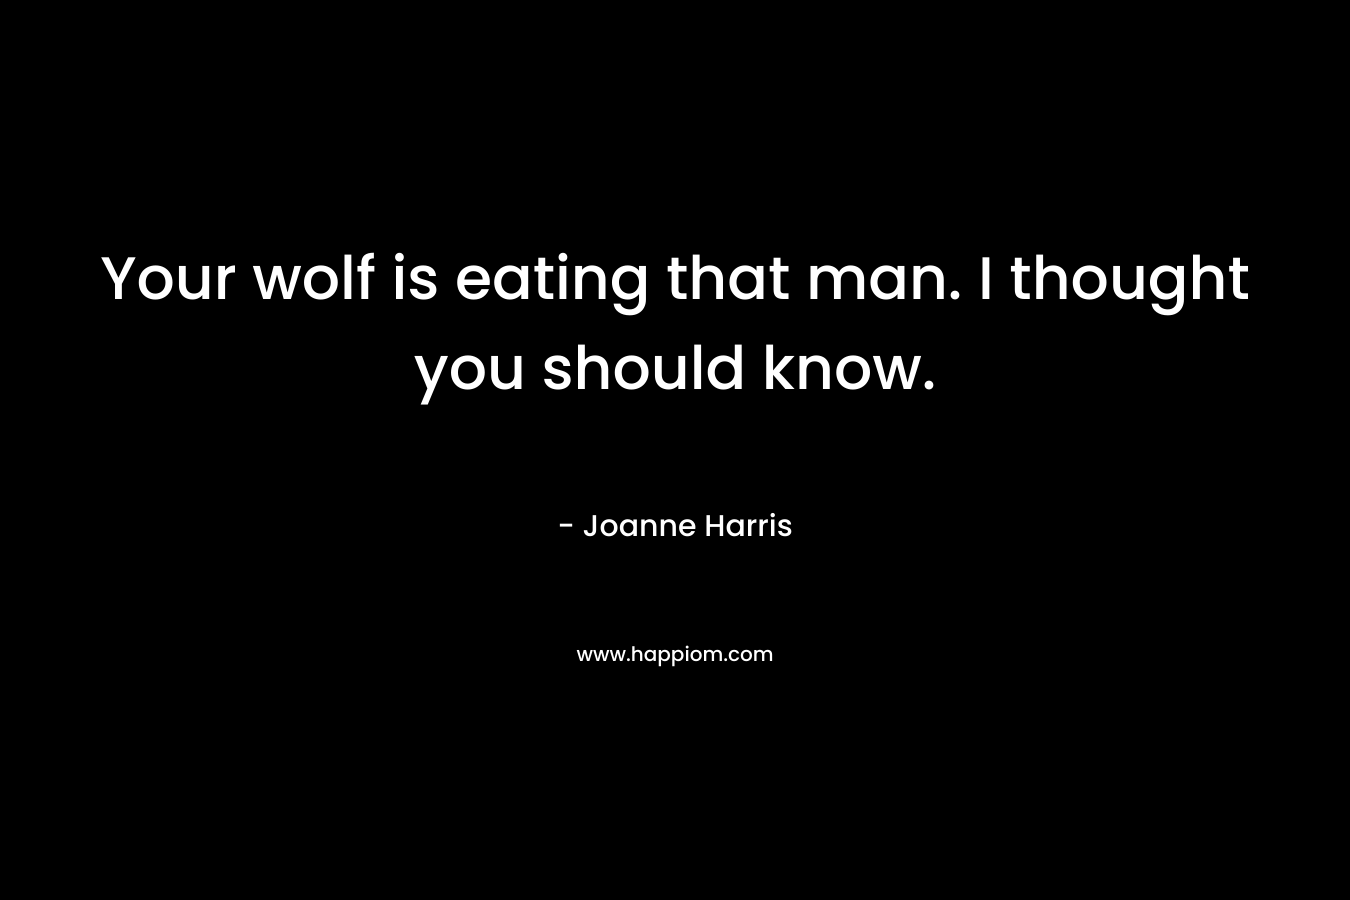 Your wolf is eating that man. I thought you should know.